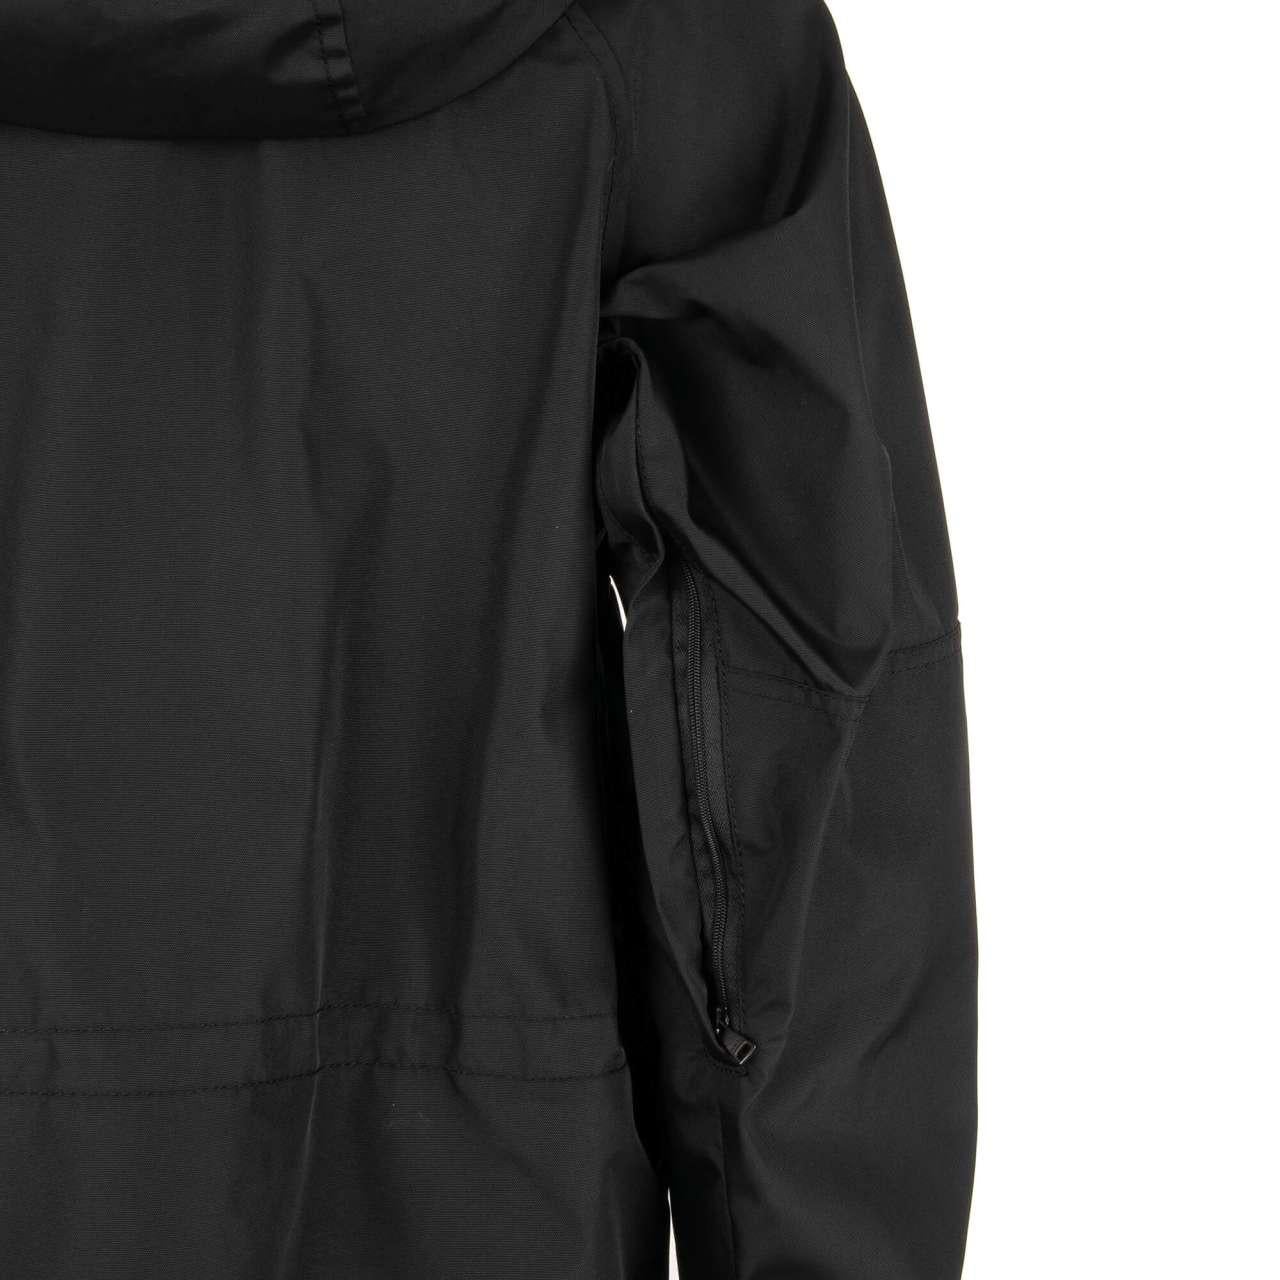 Dolce & Gabbana RECCO Ski Jacket with Pockets and Hand Warmer Black 48 M For Sale 1